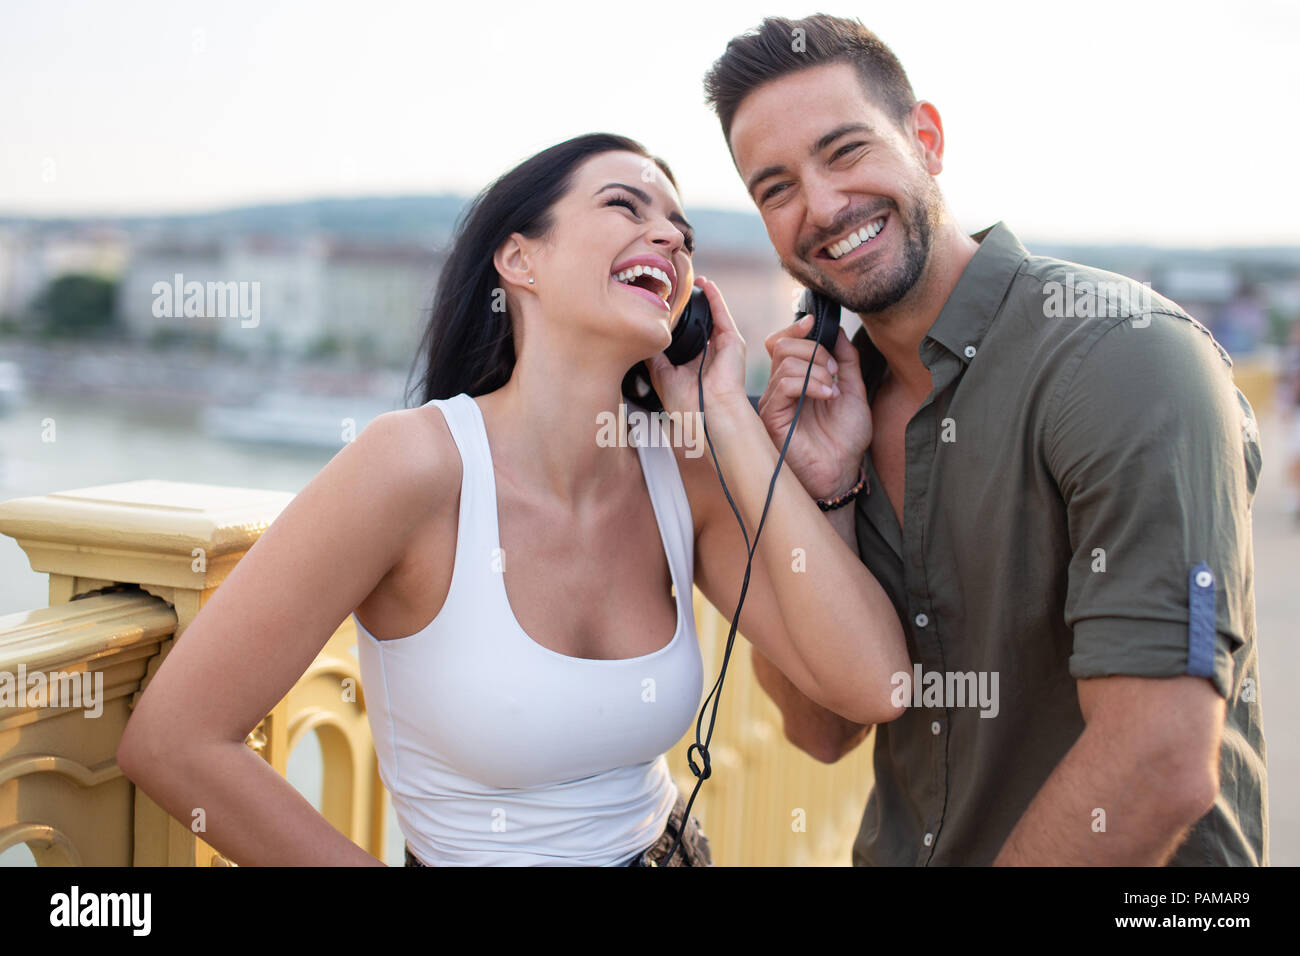 Happy young couple sharing headphones and laughing in city outdoors Stock Photo